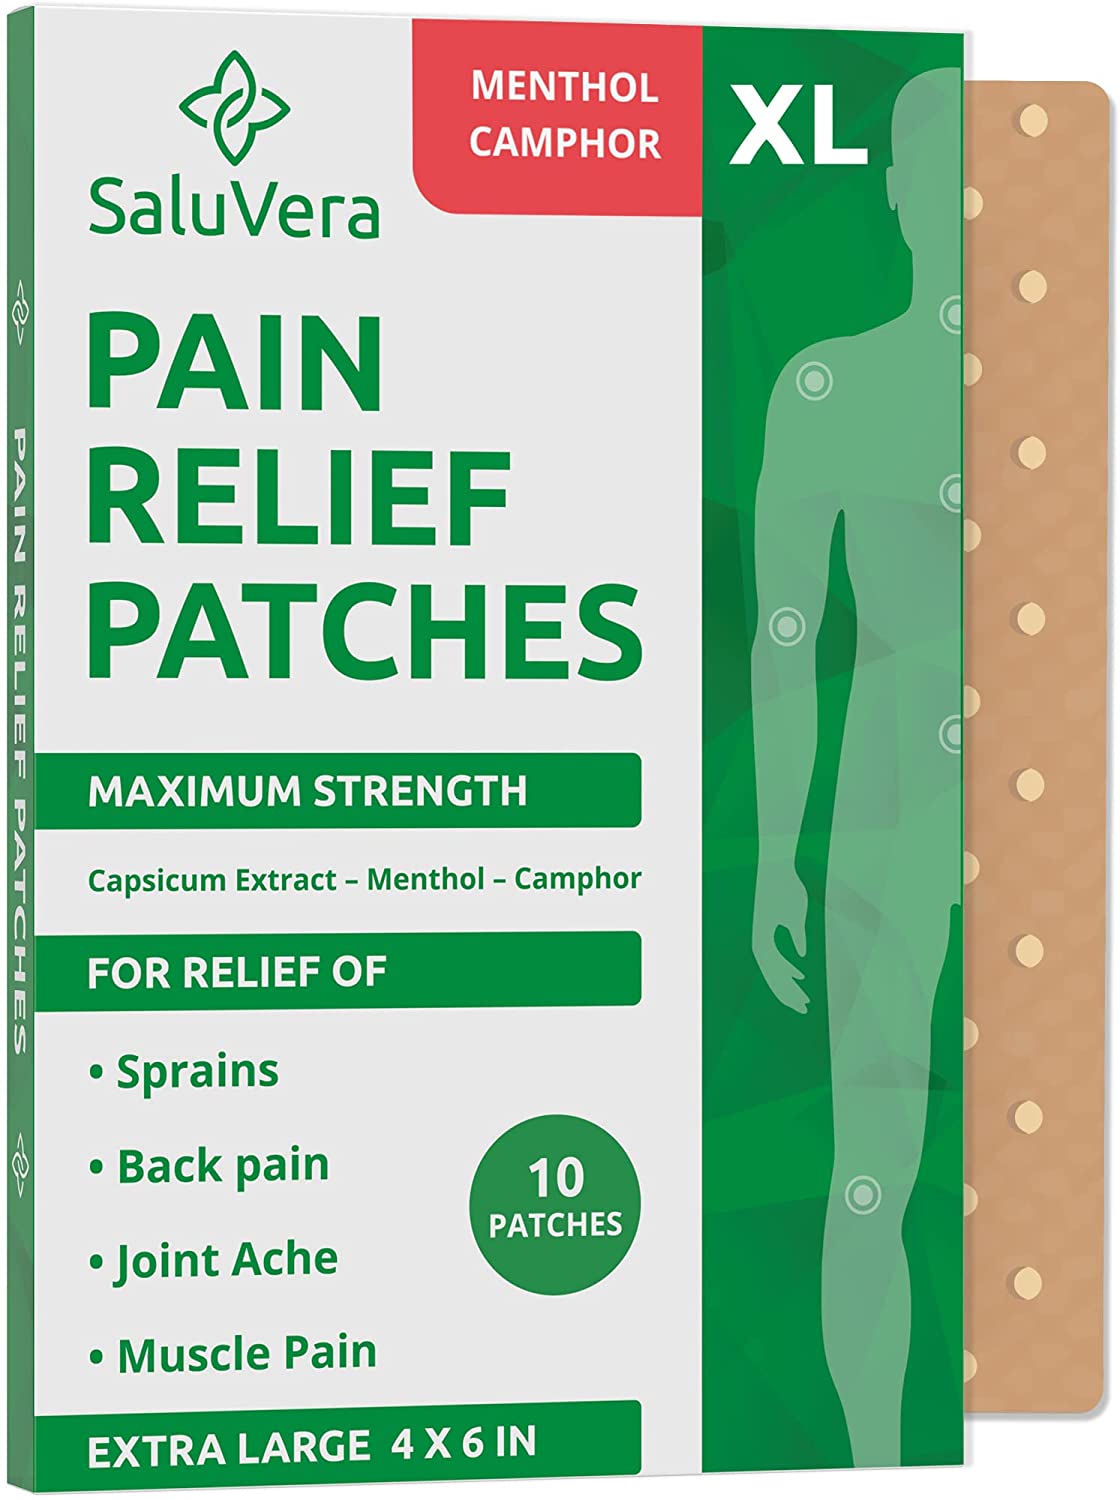 Mentholatum WellPatch Backache Extra Large Ultra Strength Pain Relief Patch  